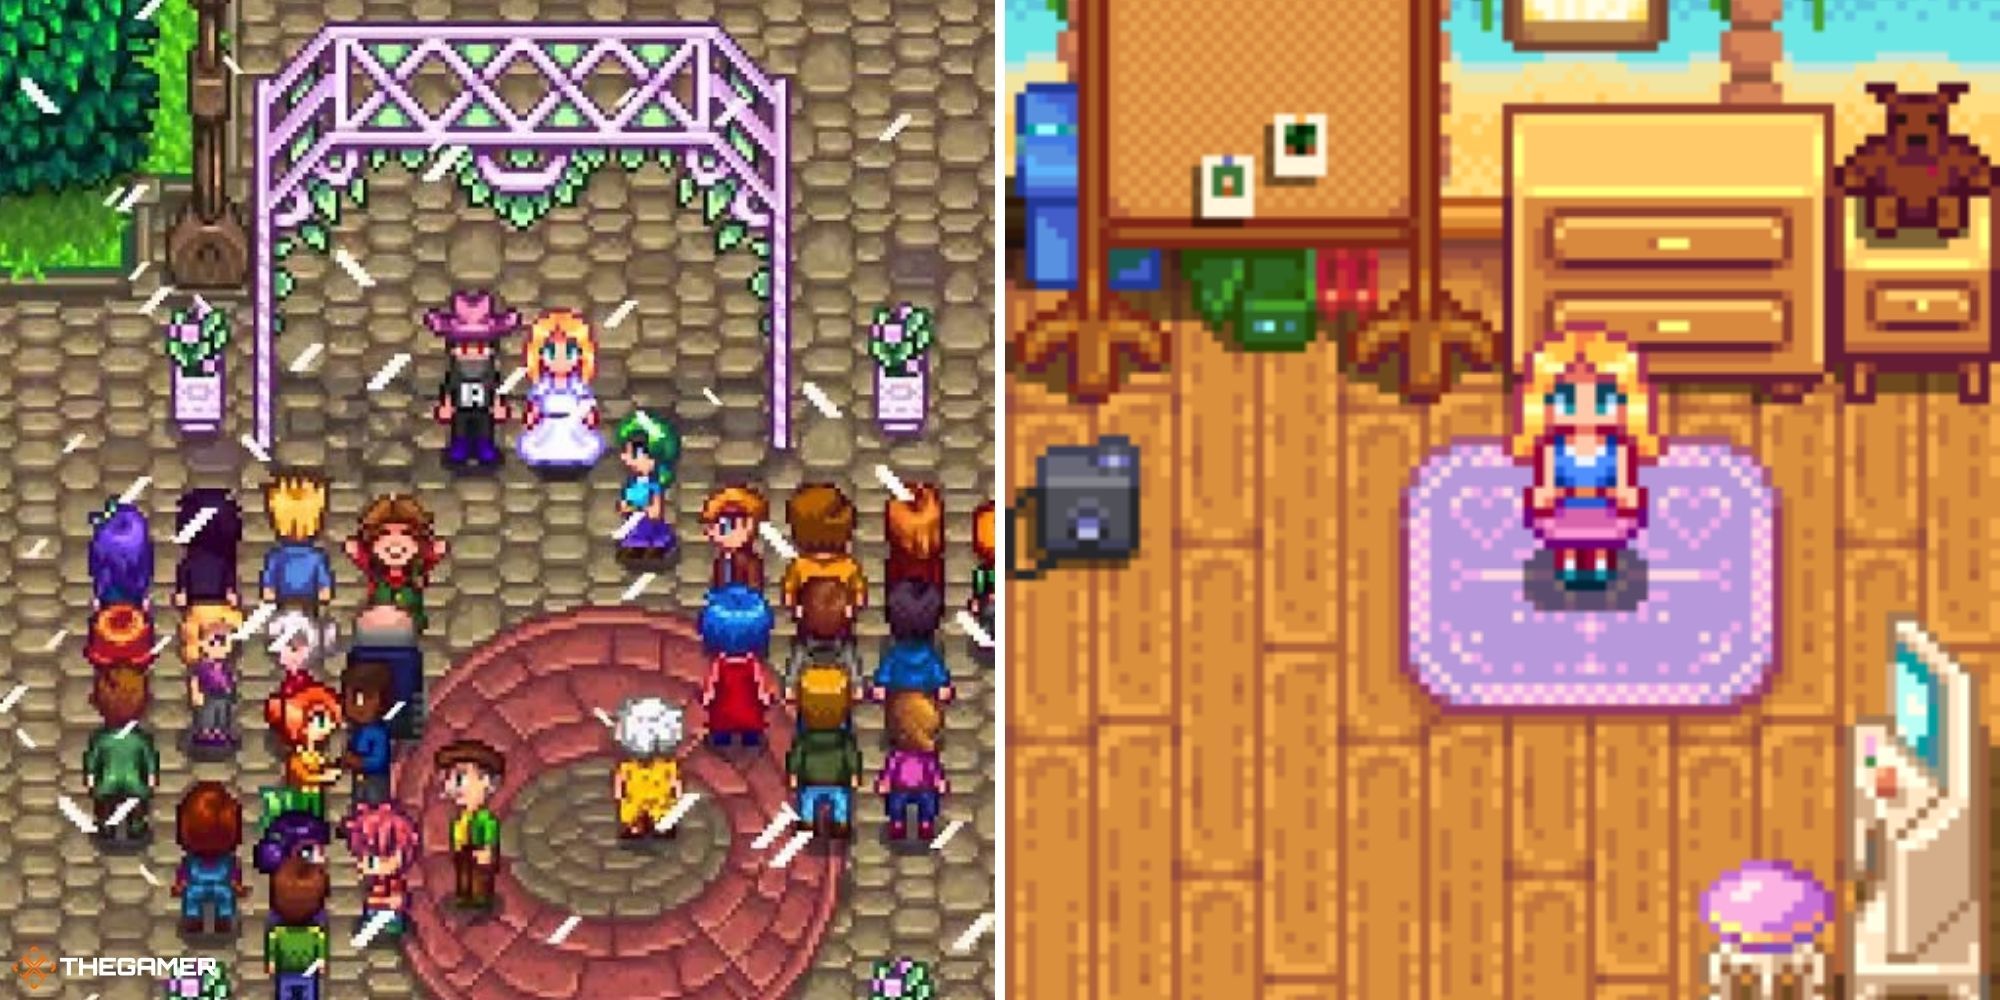 Stardew Valley - Haley's wedding (left), Haley's spouse room (right)